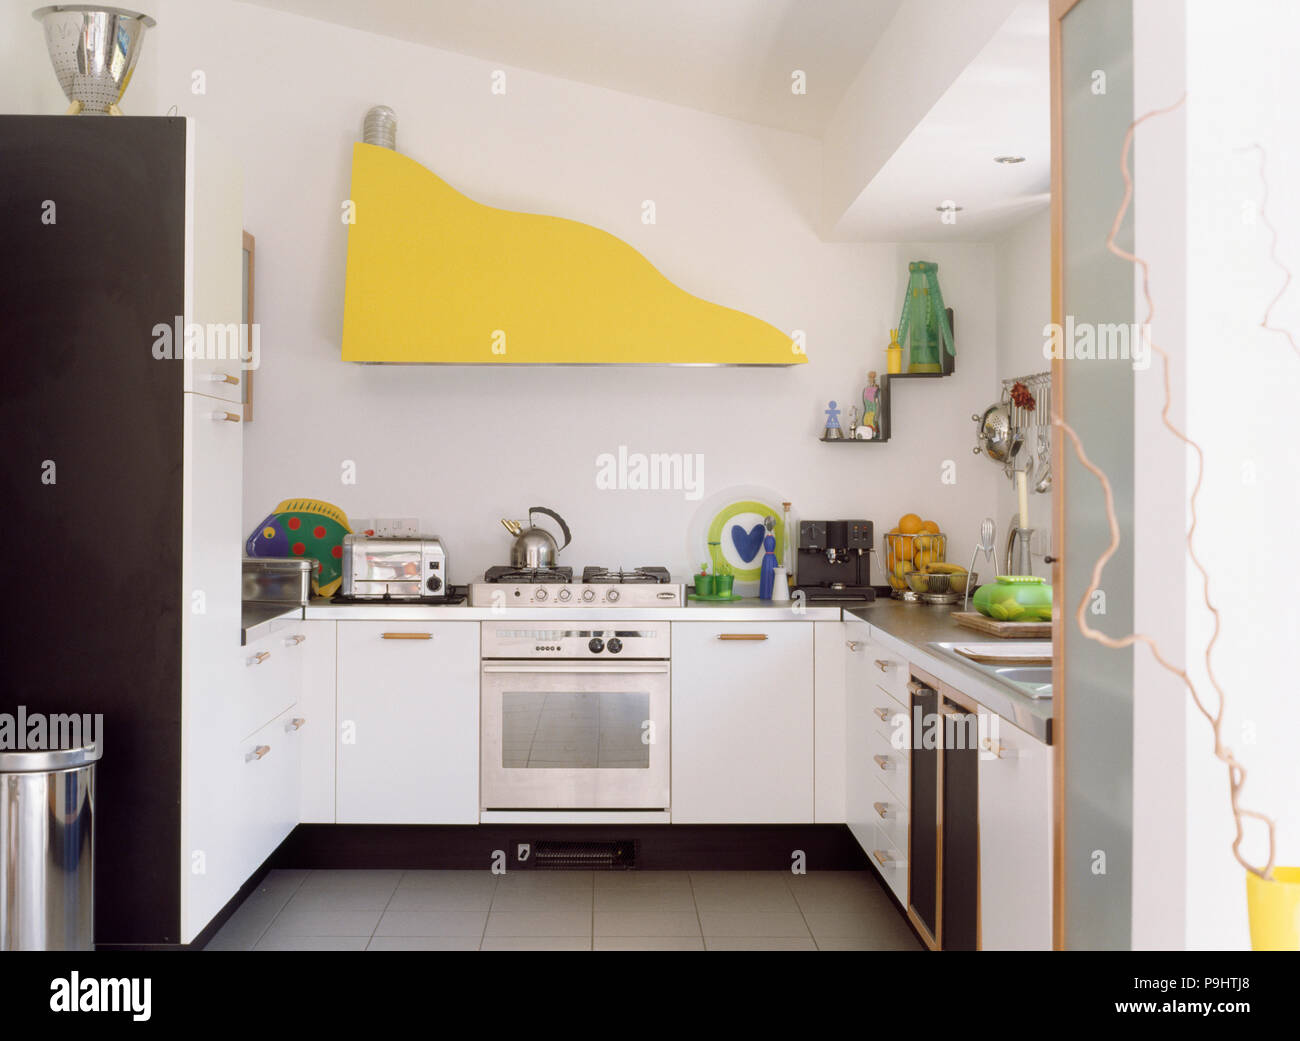 Modern white kitchen extension with extractor fan hidden behind yellow boarding Stock Photo